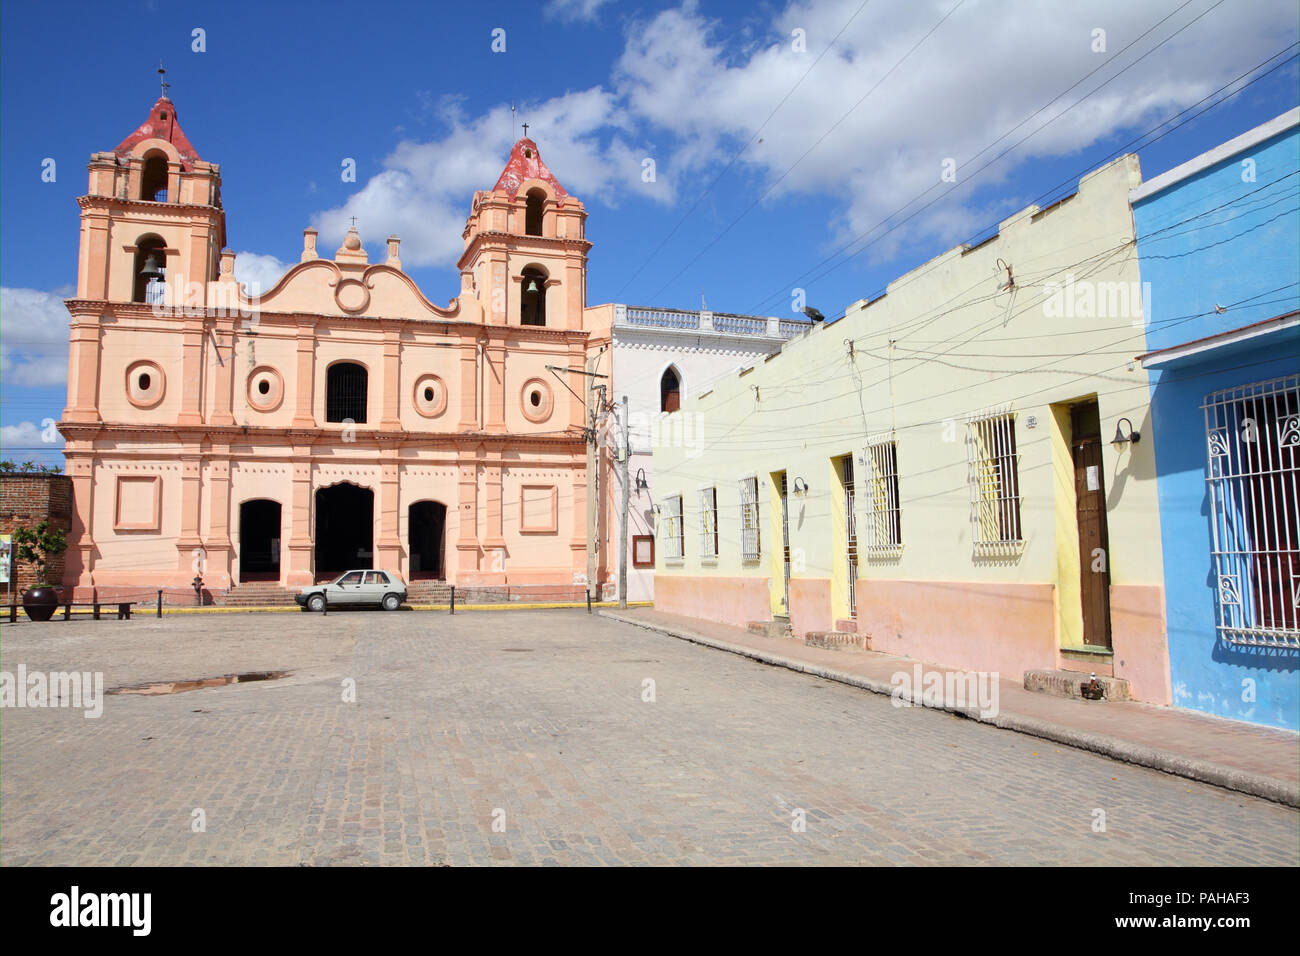 Camaguey, Cuba - old town listed on UNESCO World Heritage List Stock Photo